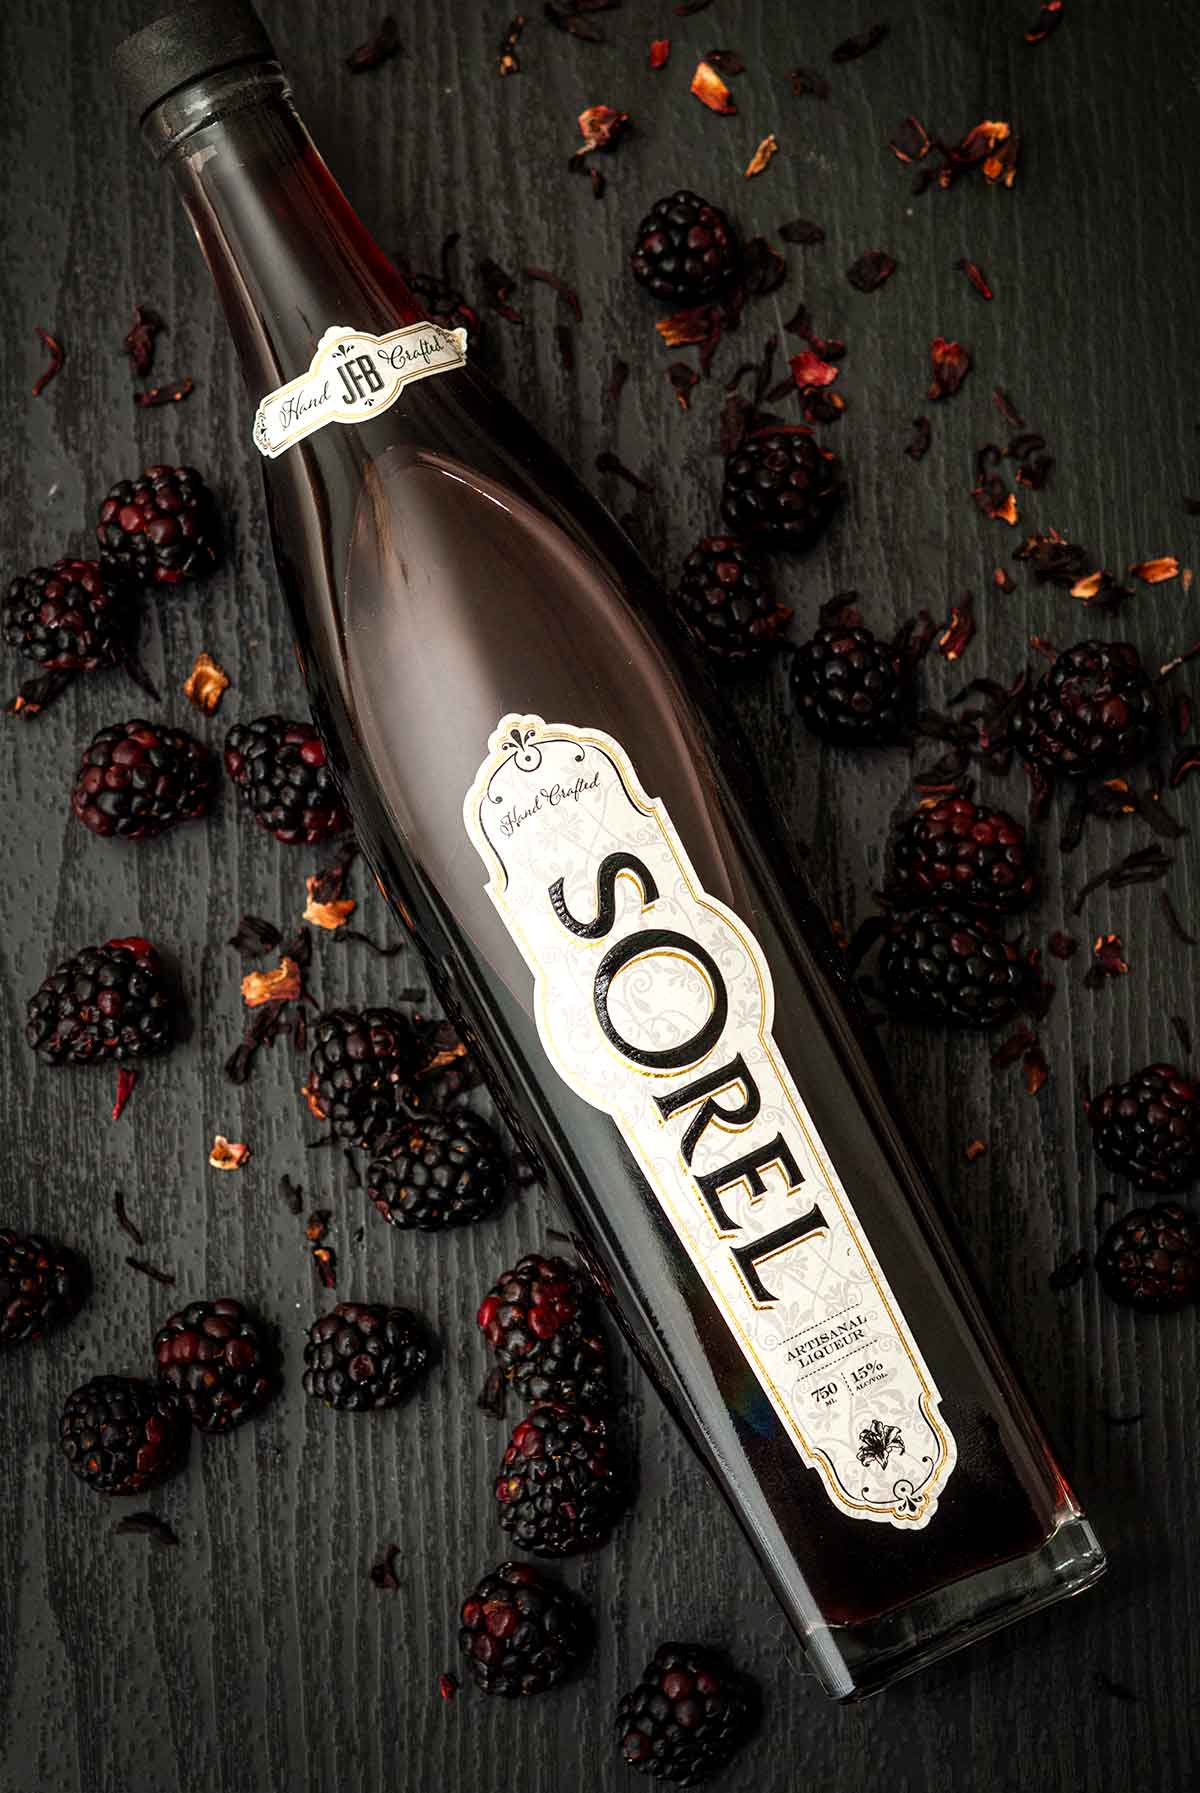 A bottle of Sorel Liqueur on a table, surrounded by blackberries and petals.